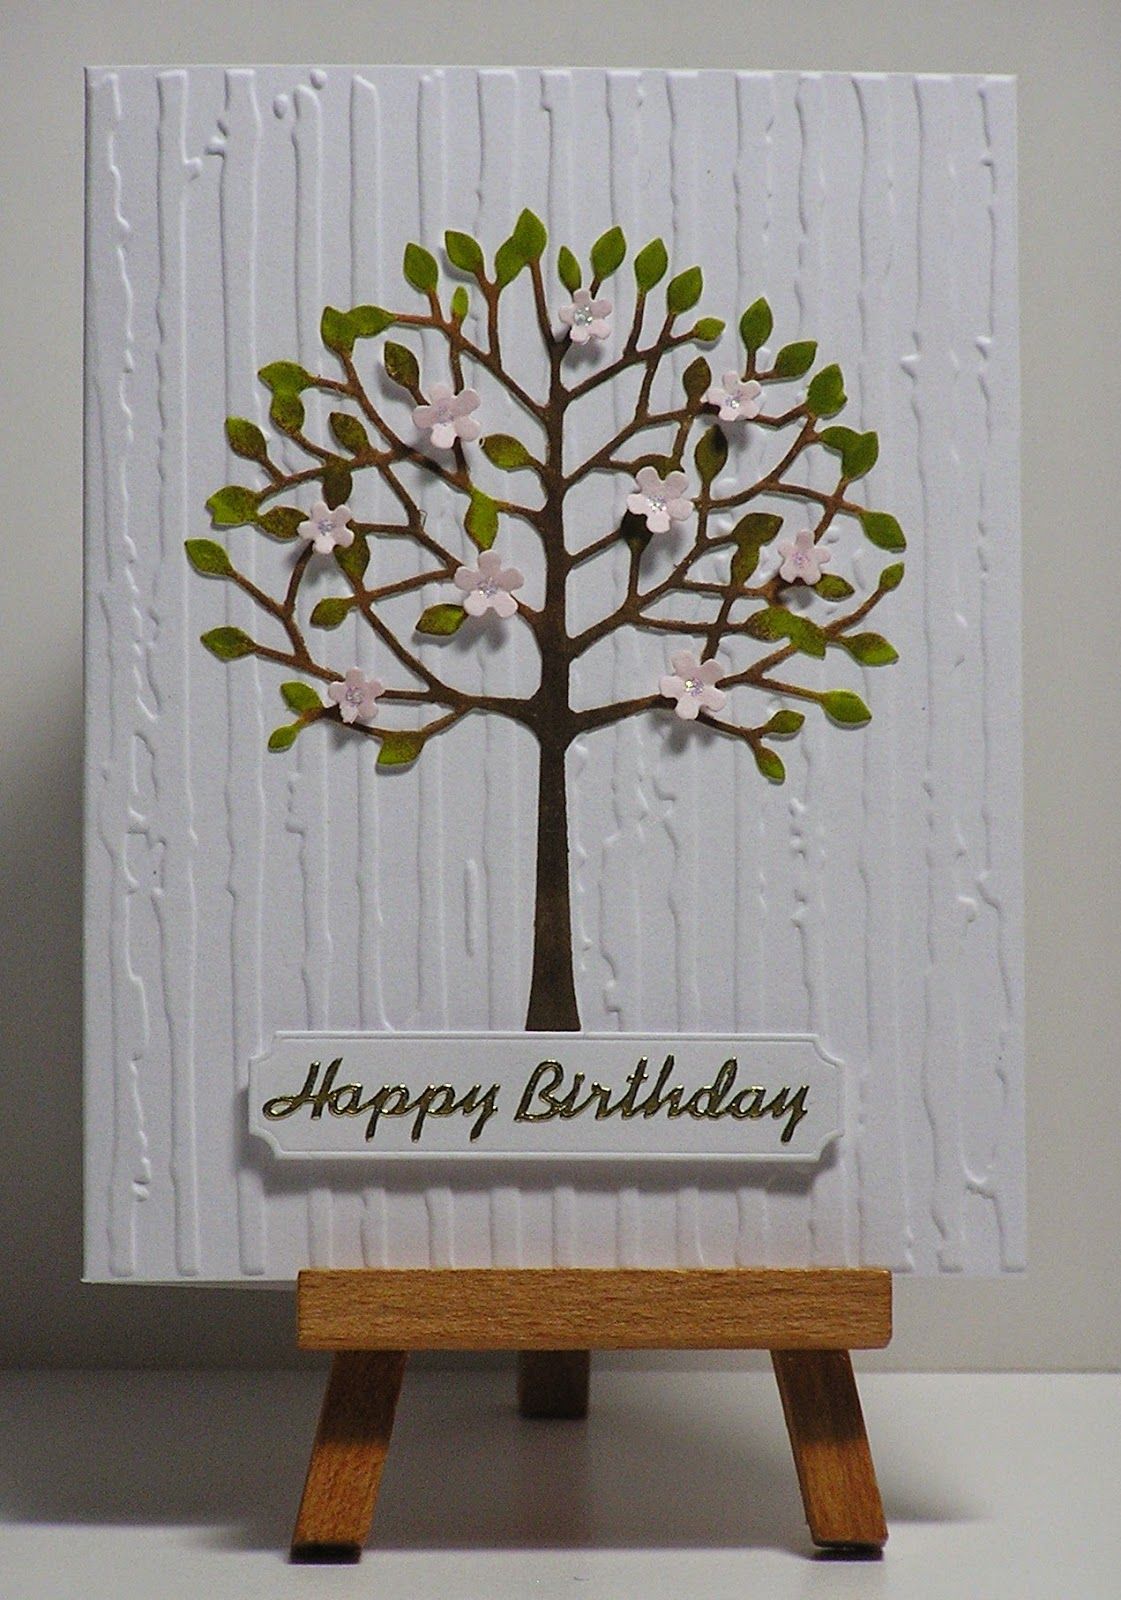 Tree Poems About Birthday Wishes